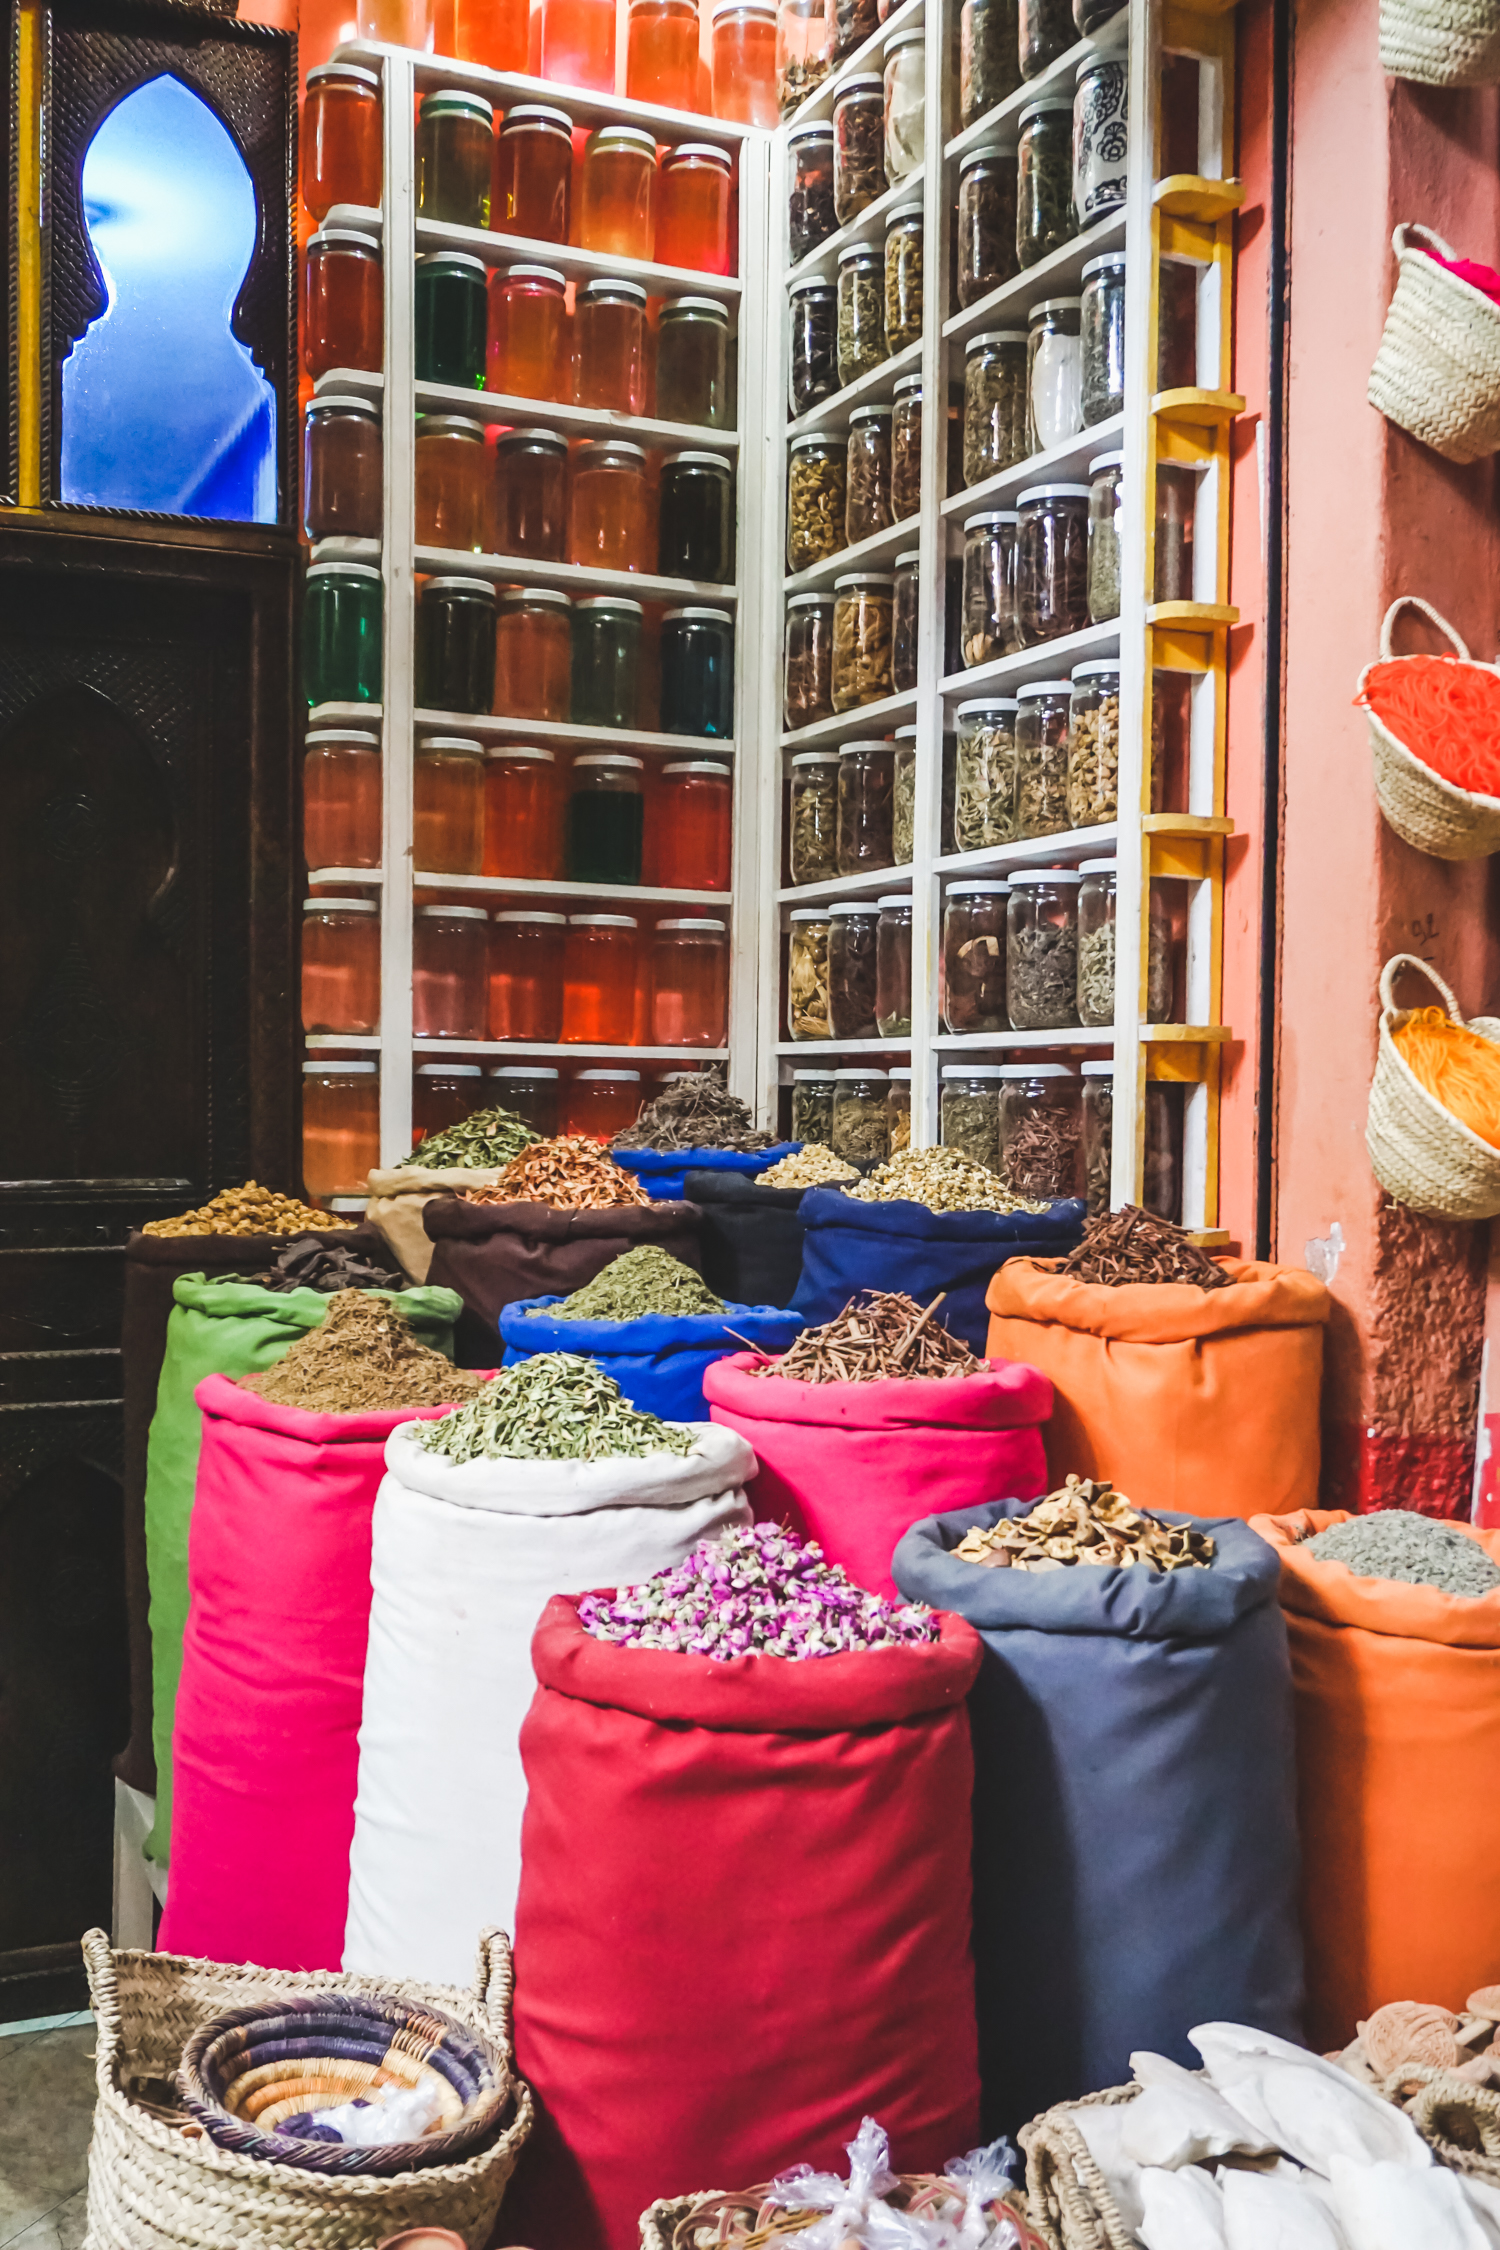 Your Guide to Bargaining in the Souks of Marrakech- Monique McHugh Blog